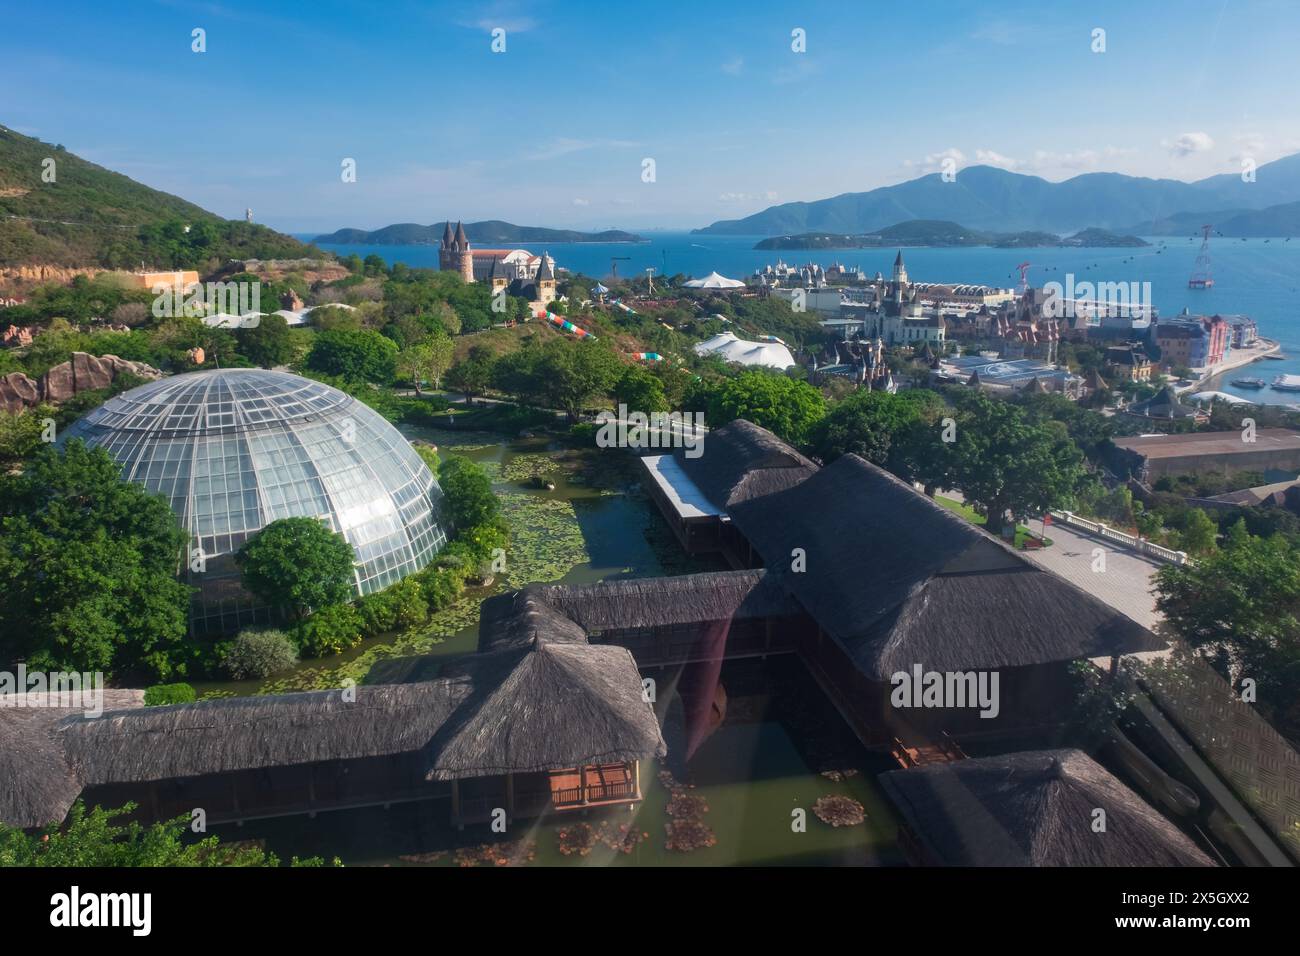 View from Ferris wheel of Nha Trang, Vinpearl Island. Resort Island with a Water Park, Amusement Park located in Vietnam. tourist attraction. landscap Stock Photo